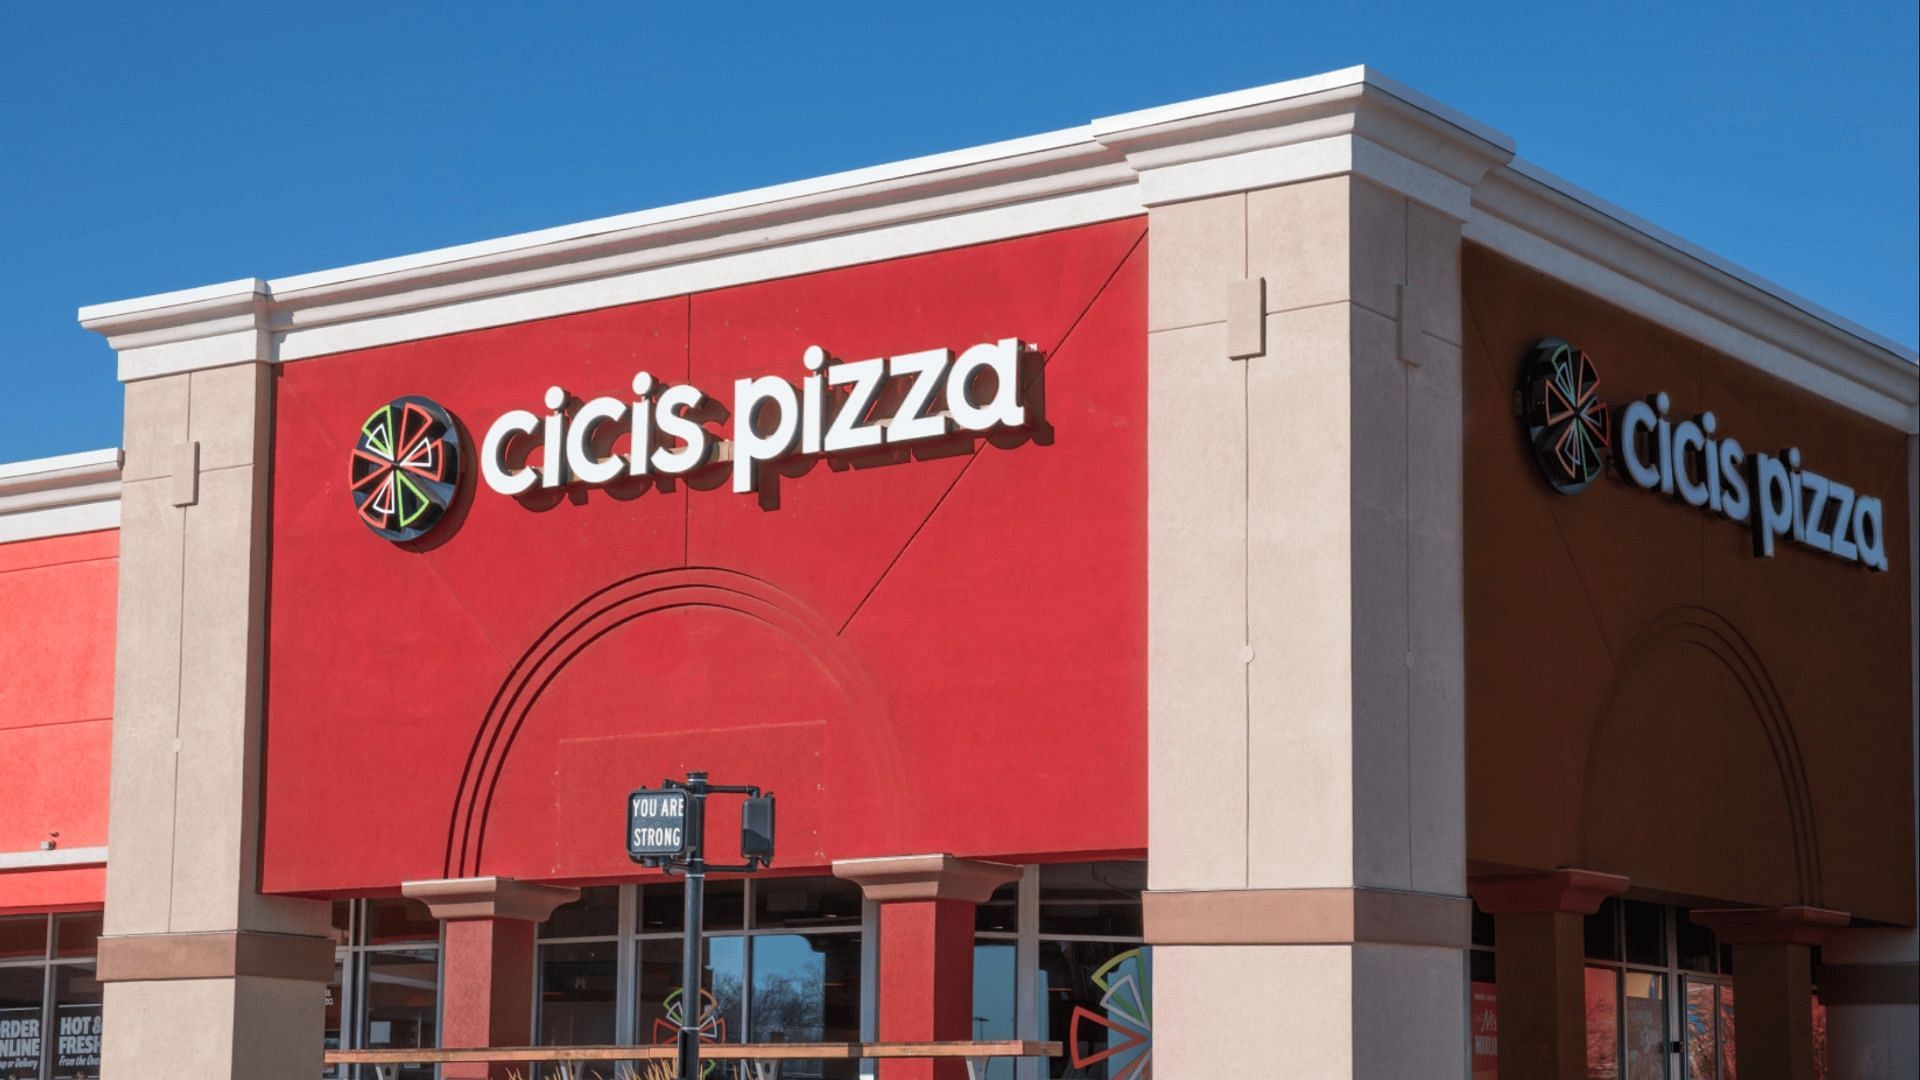 Cicis Pizza $4.99 Adult Buffet deal: How to avail, availability, and ...